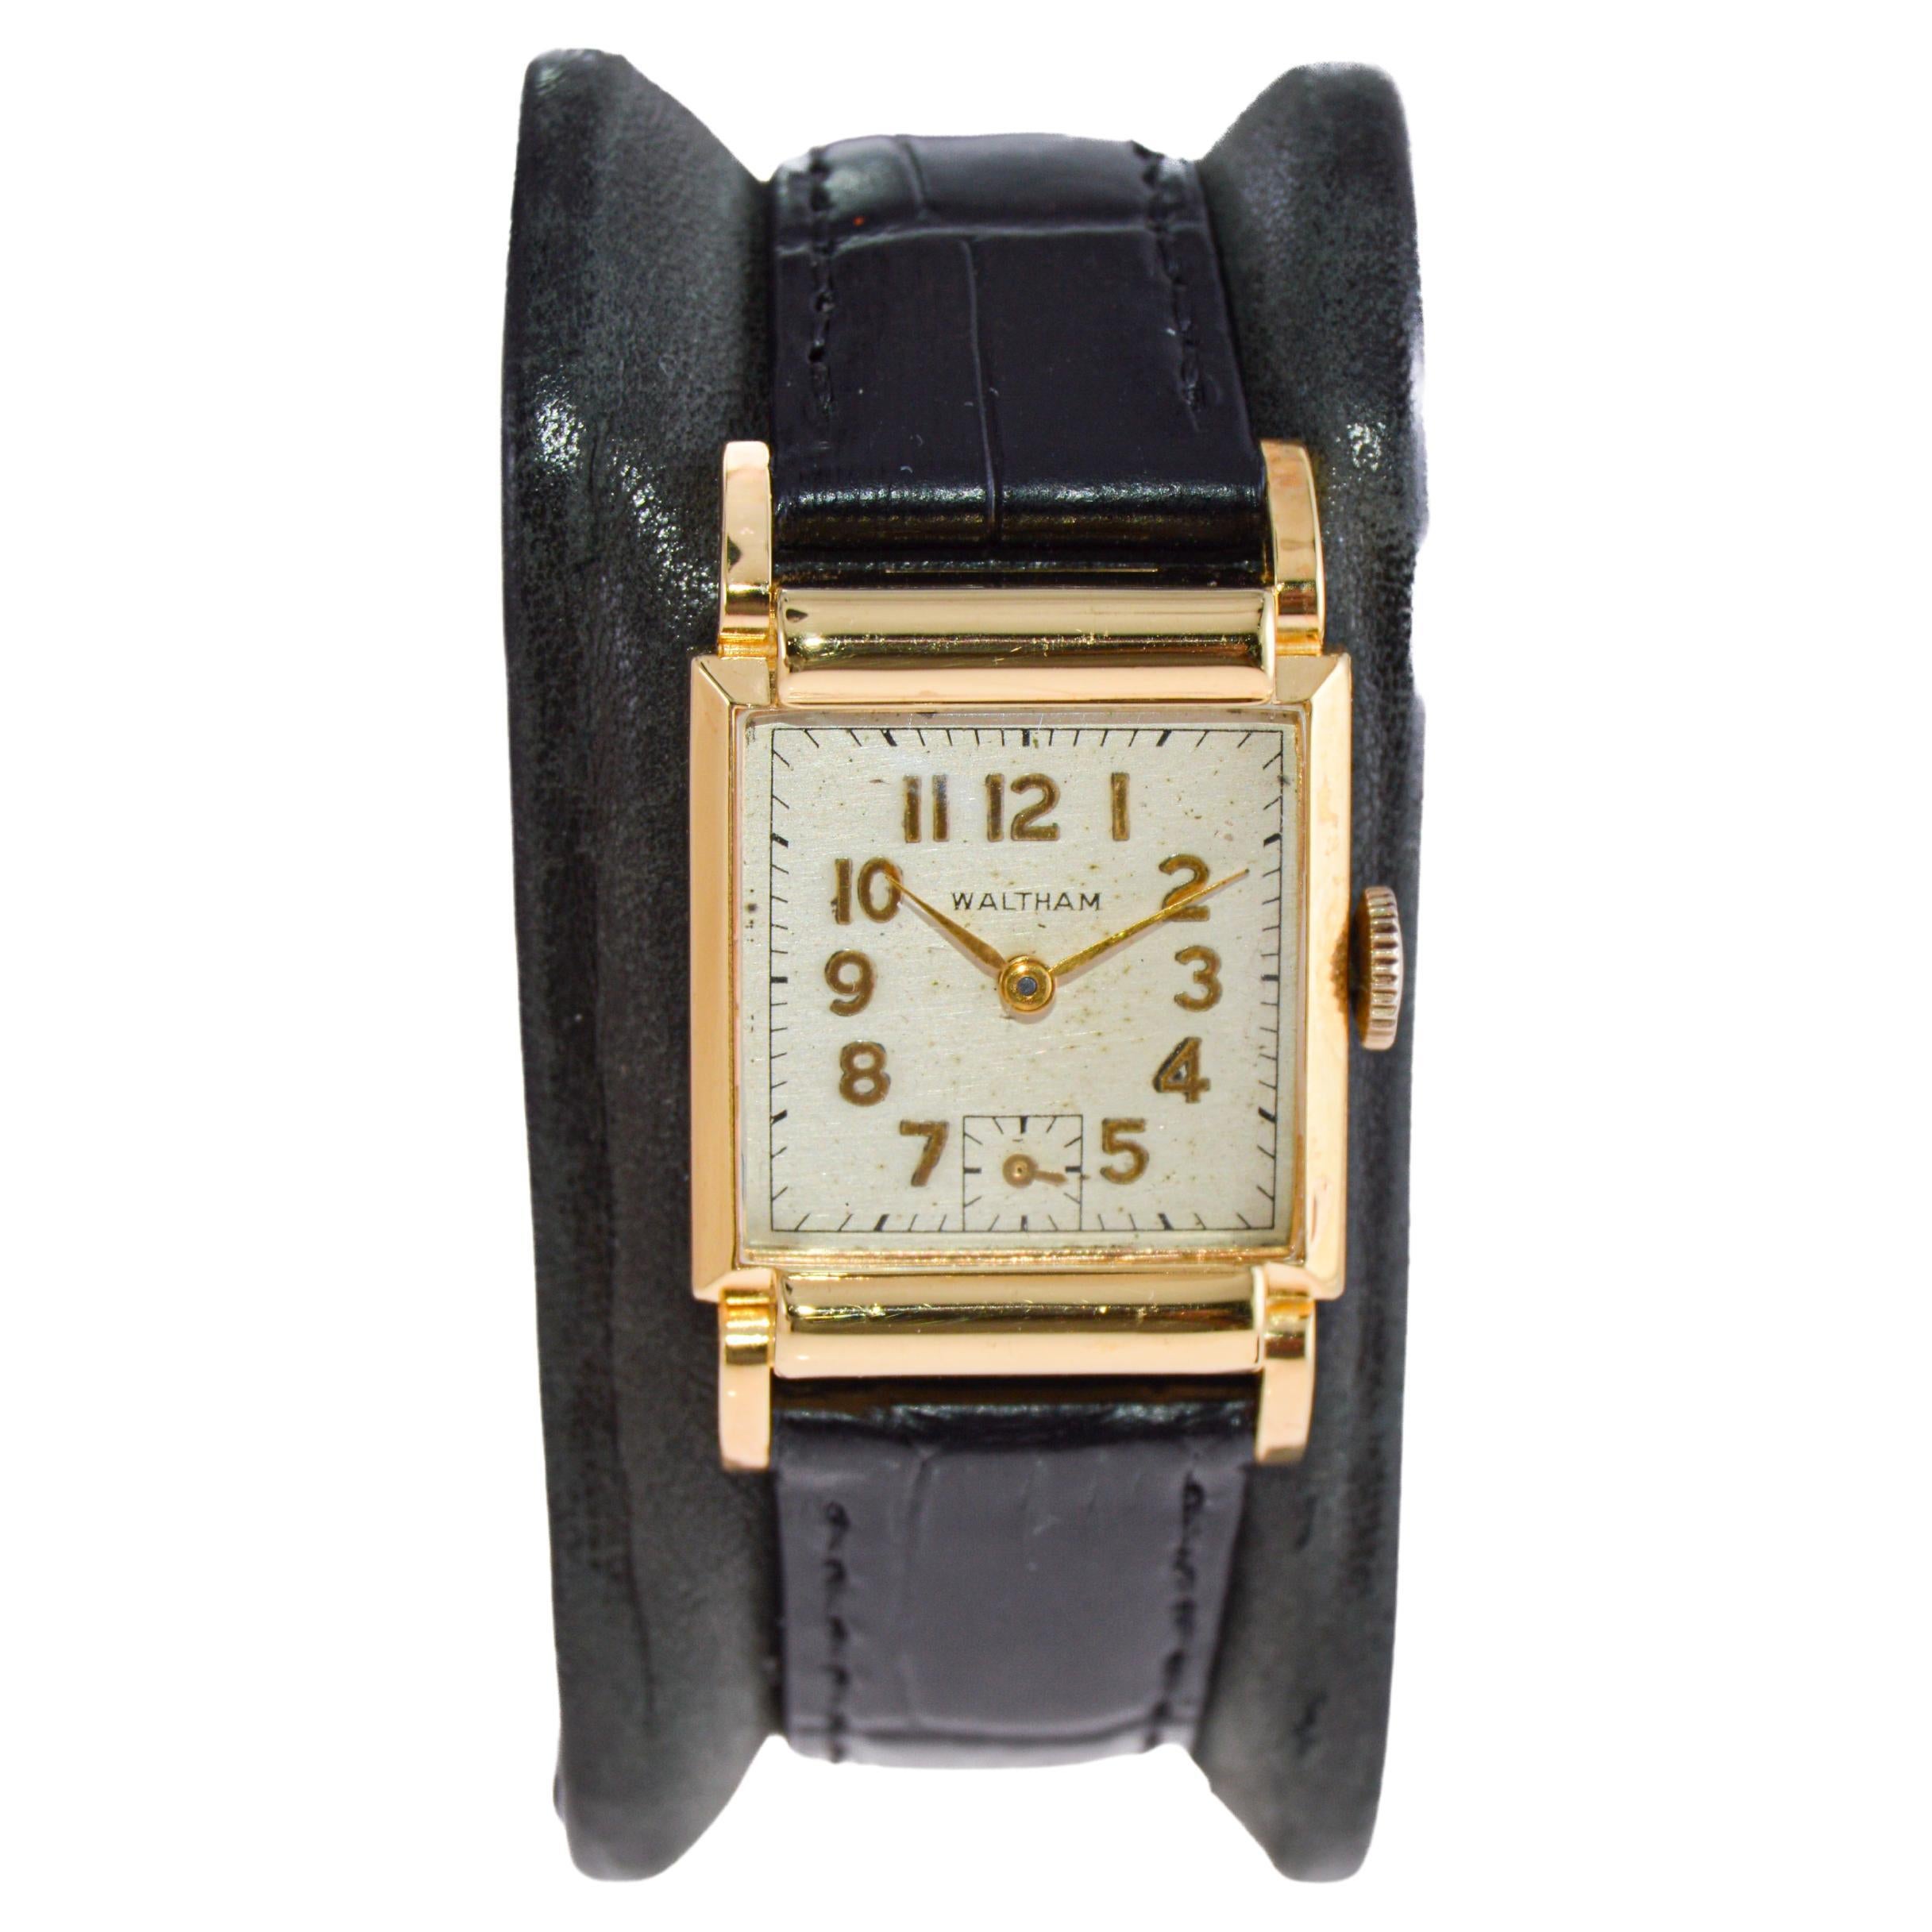 Waltham Gold Filled Art Deco Watch circa, 1940's with Original Dial